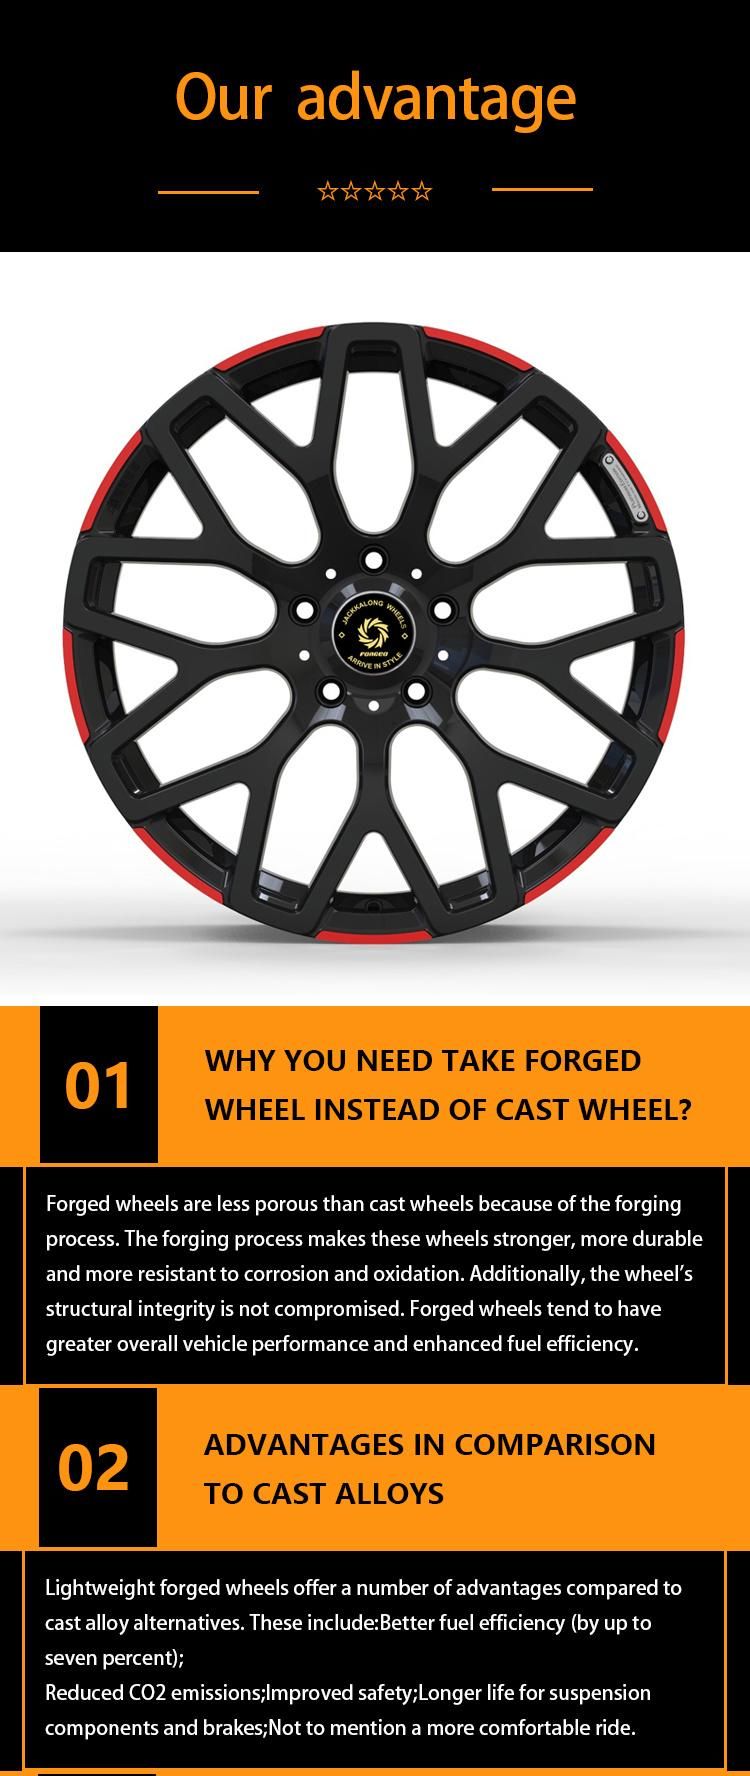 1 Piece Forged T6061 Alloy Rims Wheels for Customized T6061 Material with Mag Rims with Gloss Black +Inner Red Finish Color 